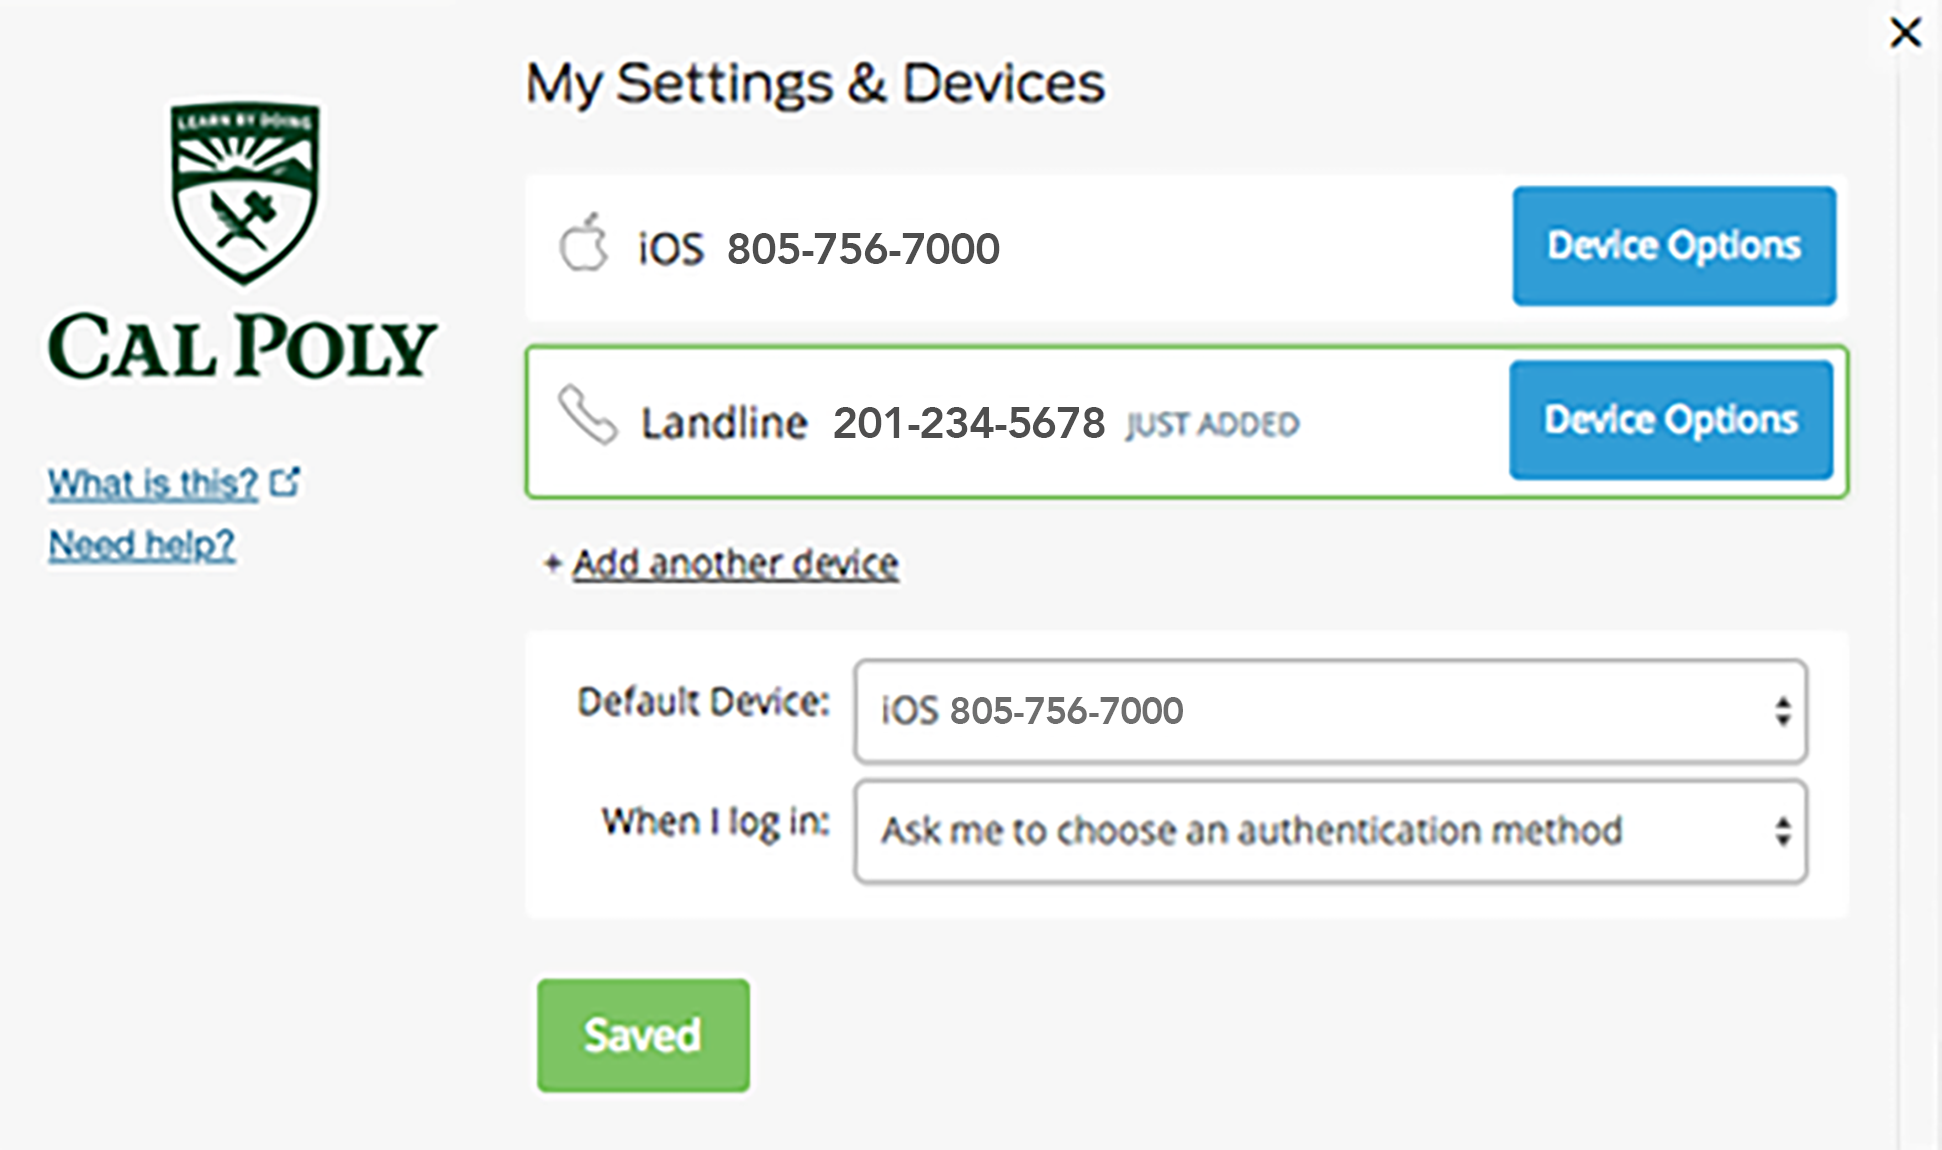 My Settings and Devices dialog box showing Landline 201-234-5678 Just Added.